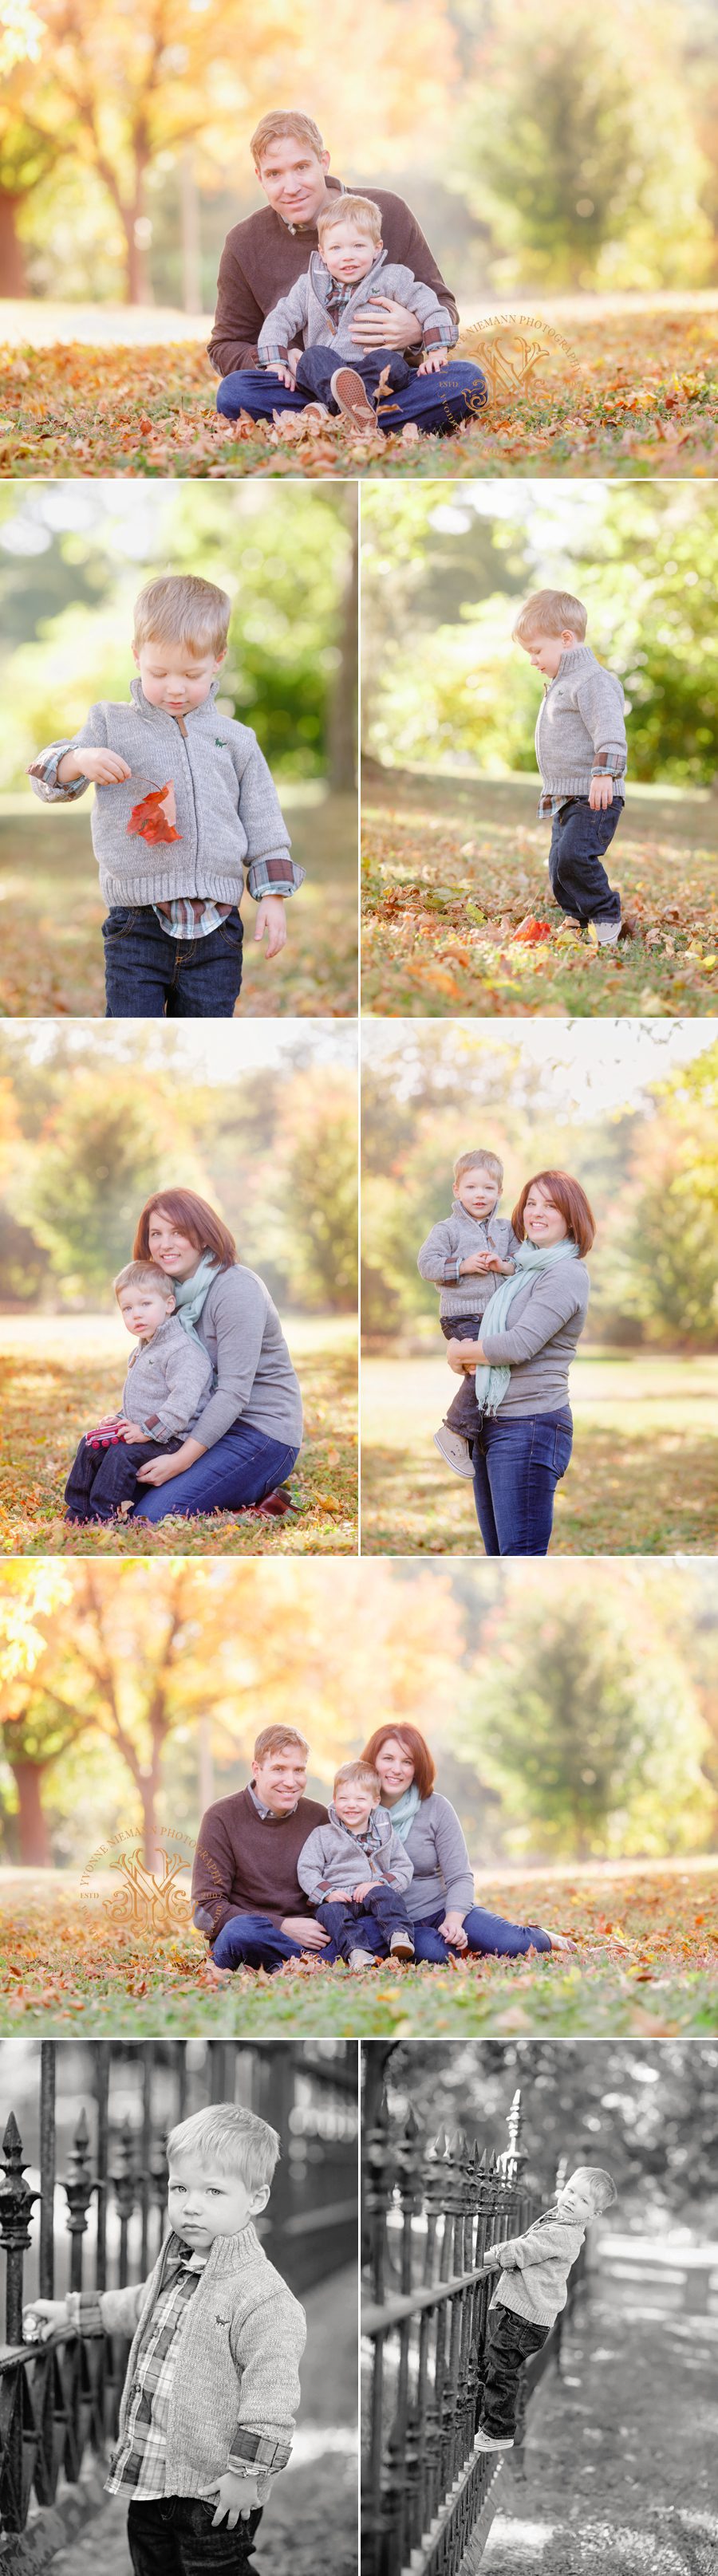 Fall family photo session in St. Louis.